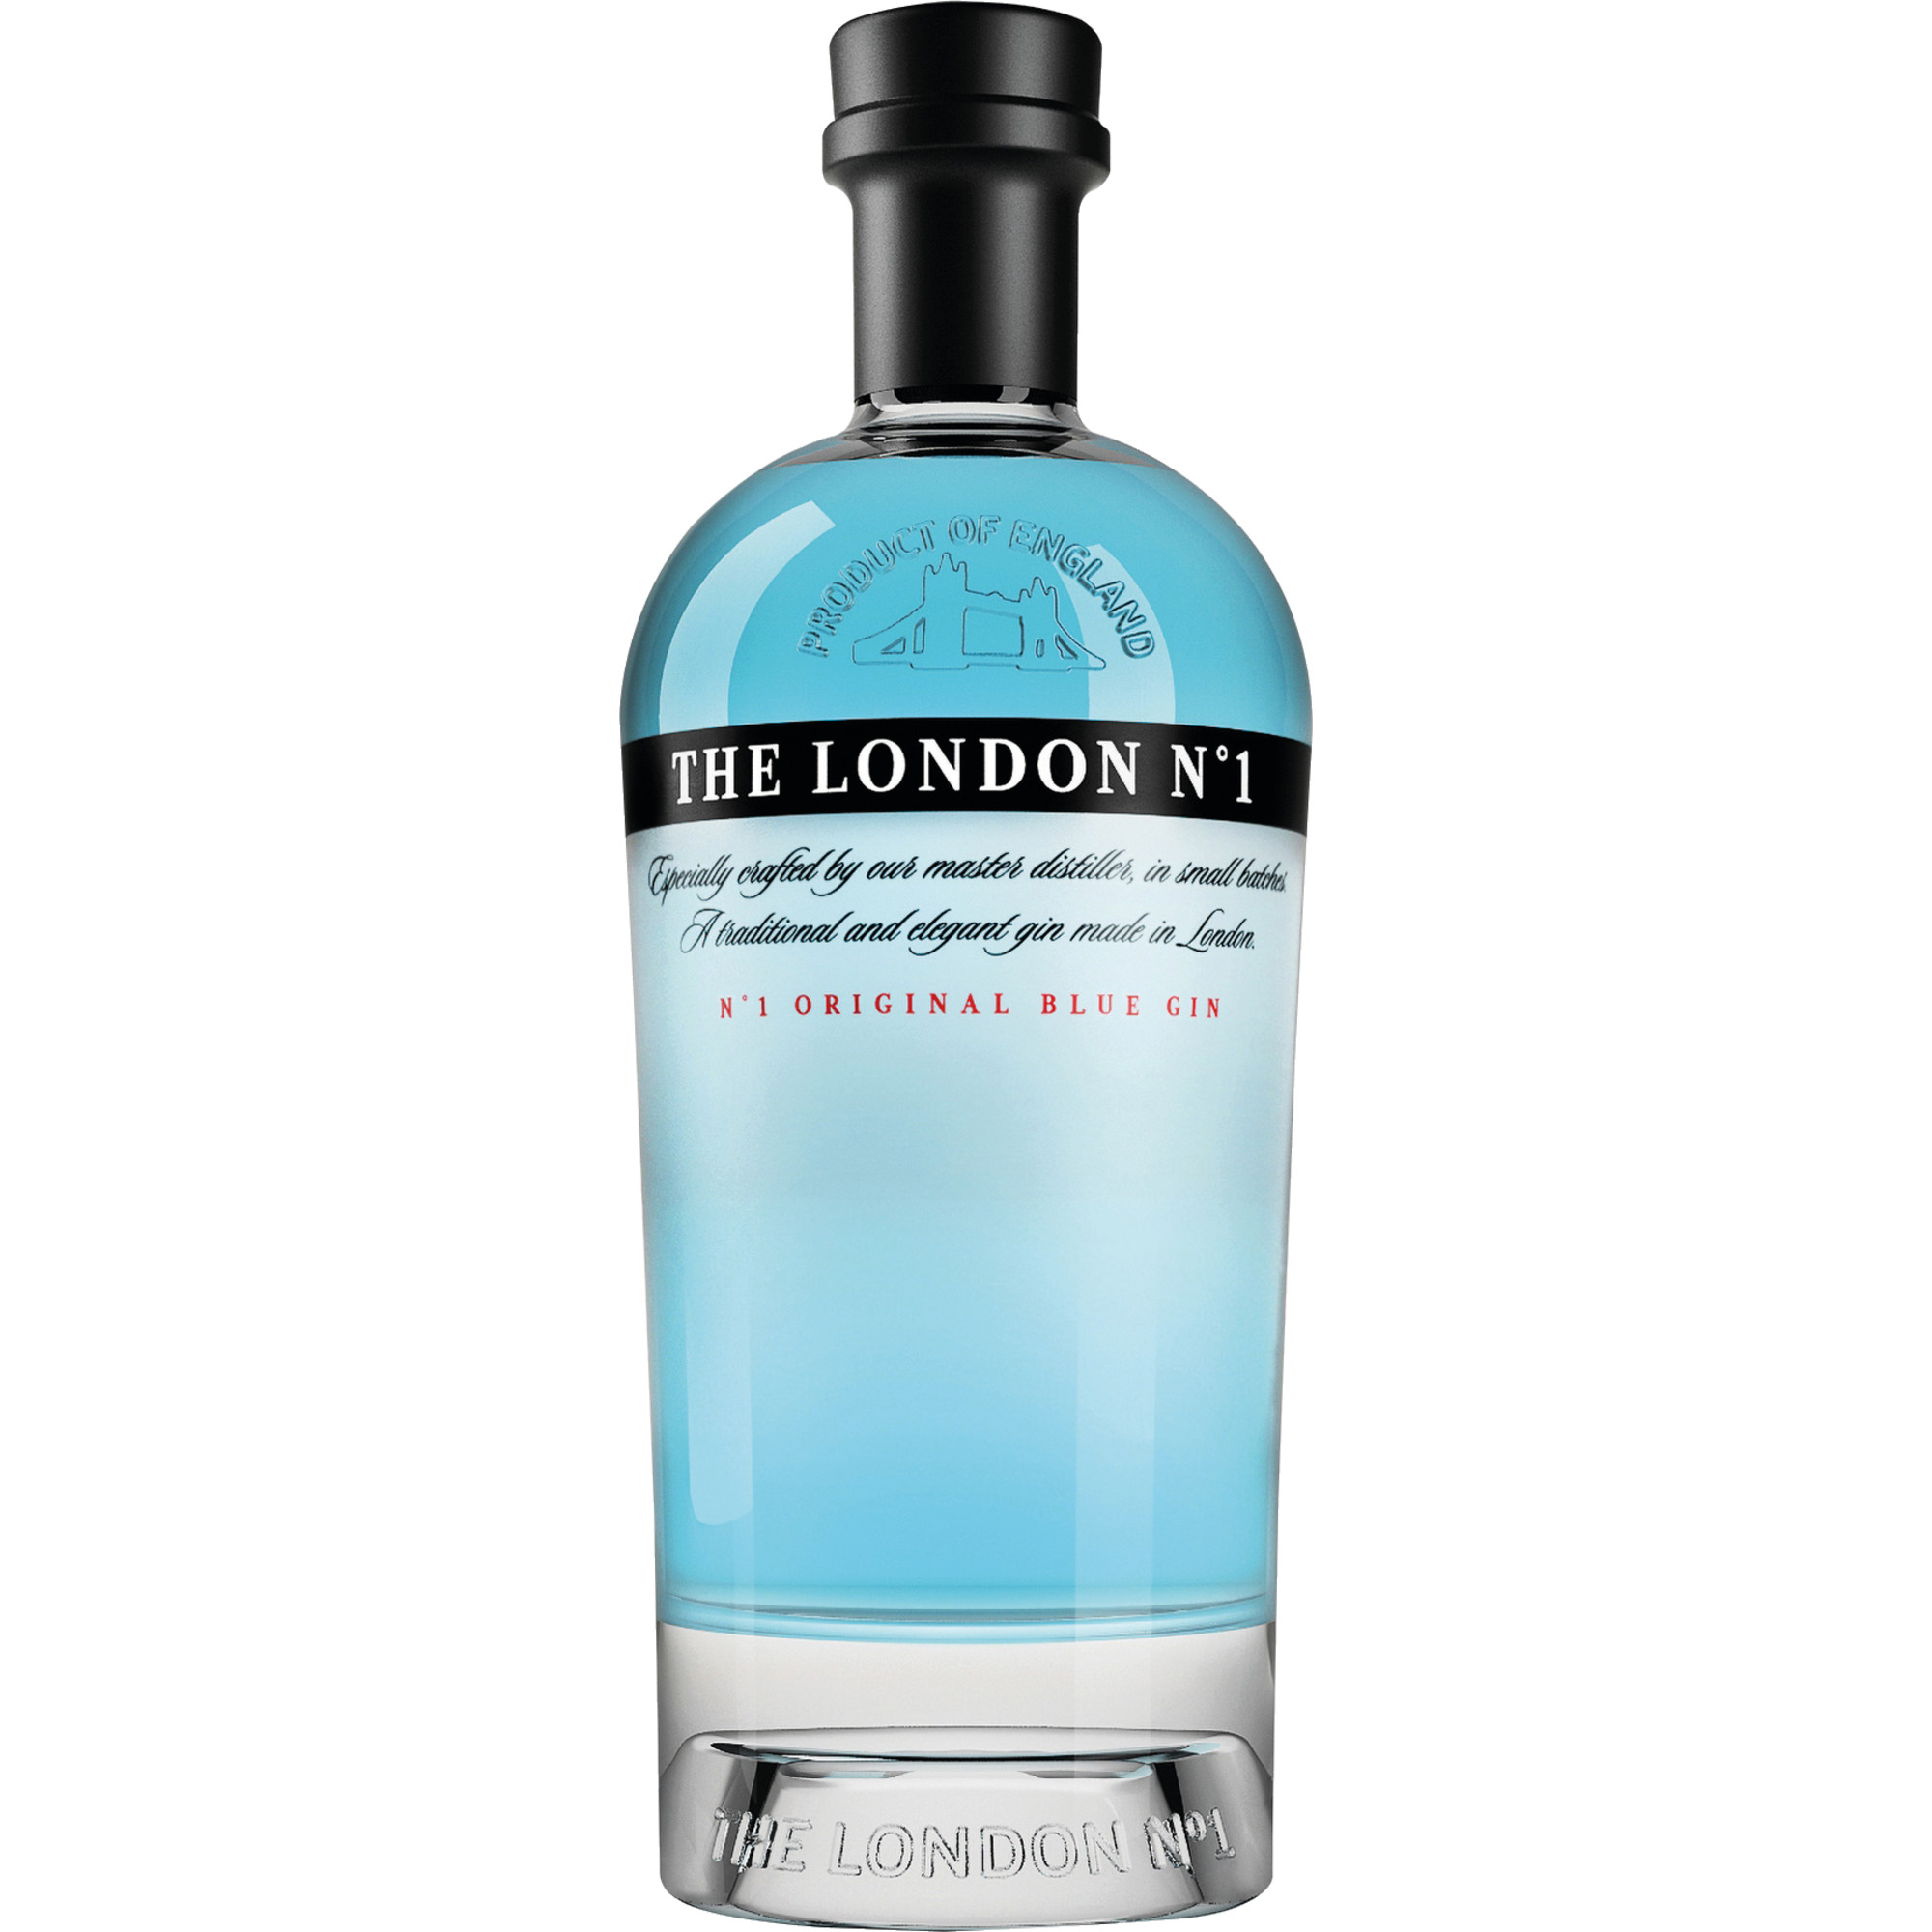 The London Gin No.1